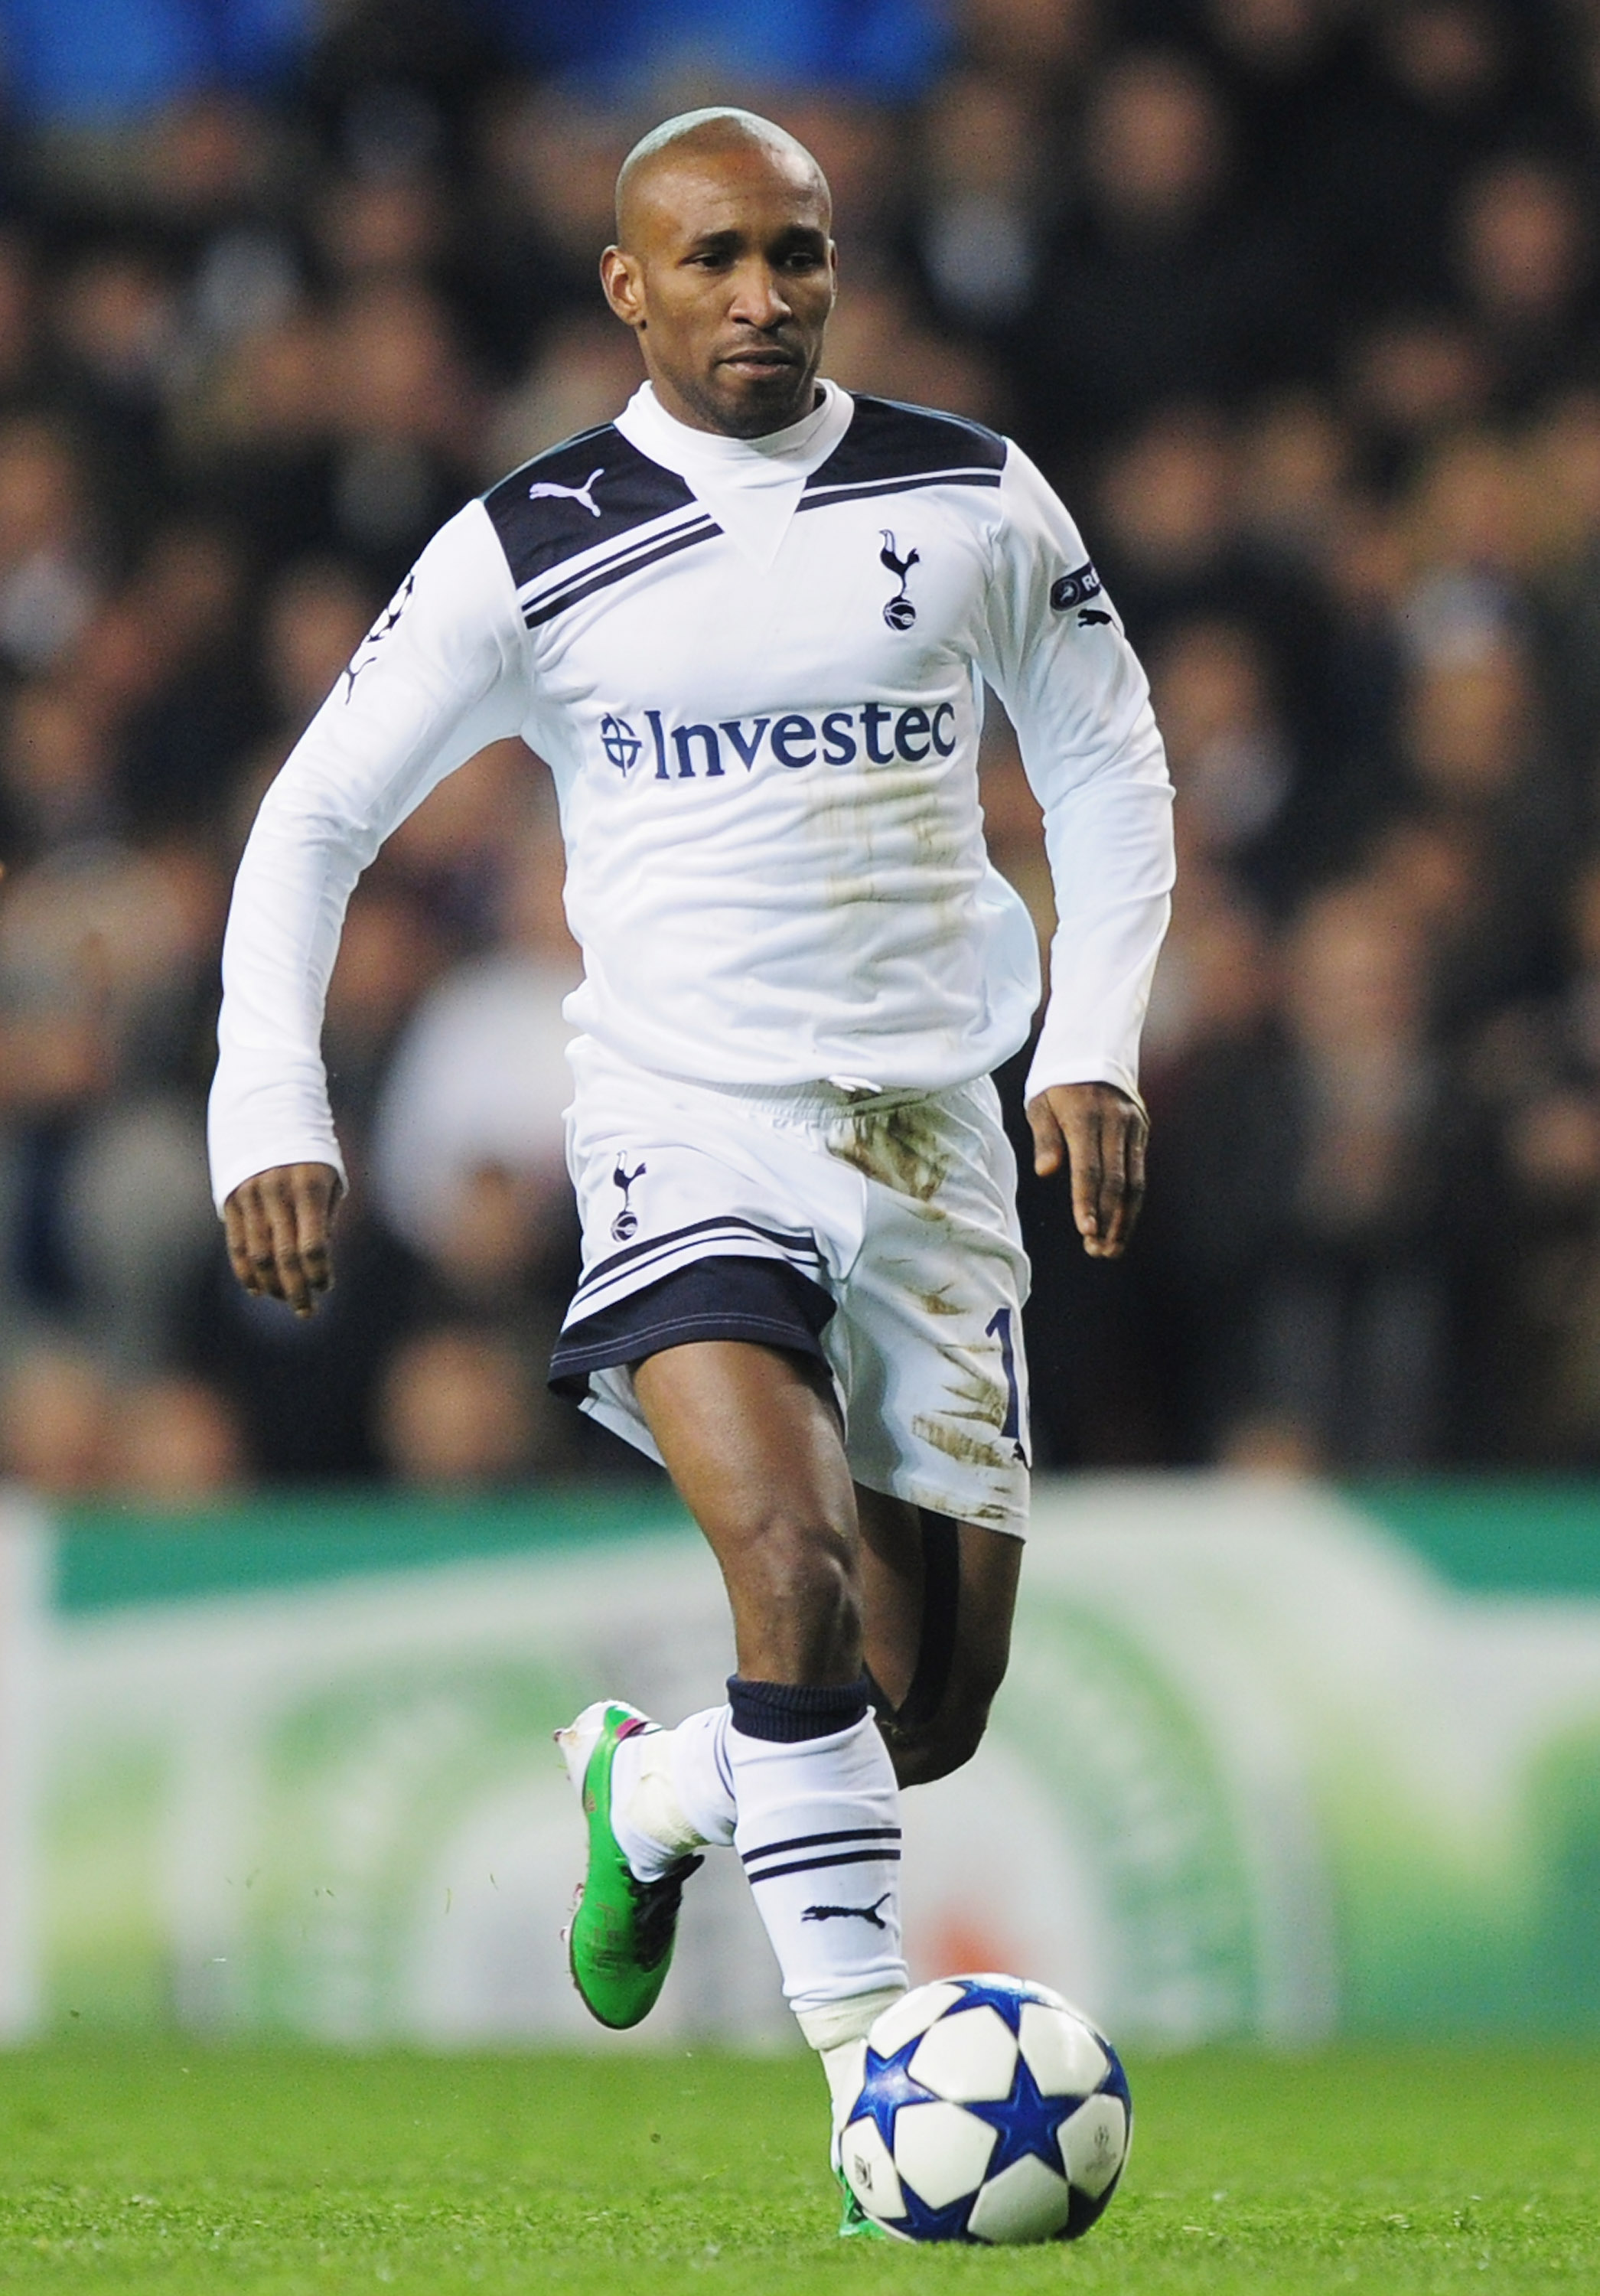 LONDON, ENGLAND - NOVEMBER 24:  Jermain Defoe of Tottenham Hotspur in action during the UEFA Champions League Group A match between Tottenham Hotspur and SV Werder Bremen at White Hart Lane on November 24, 2010 in London, England.  (Photo by Shaun Botteri